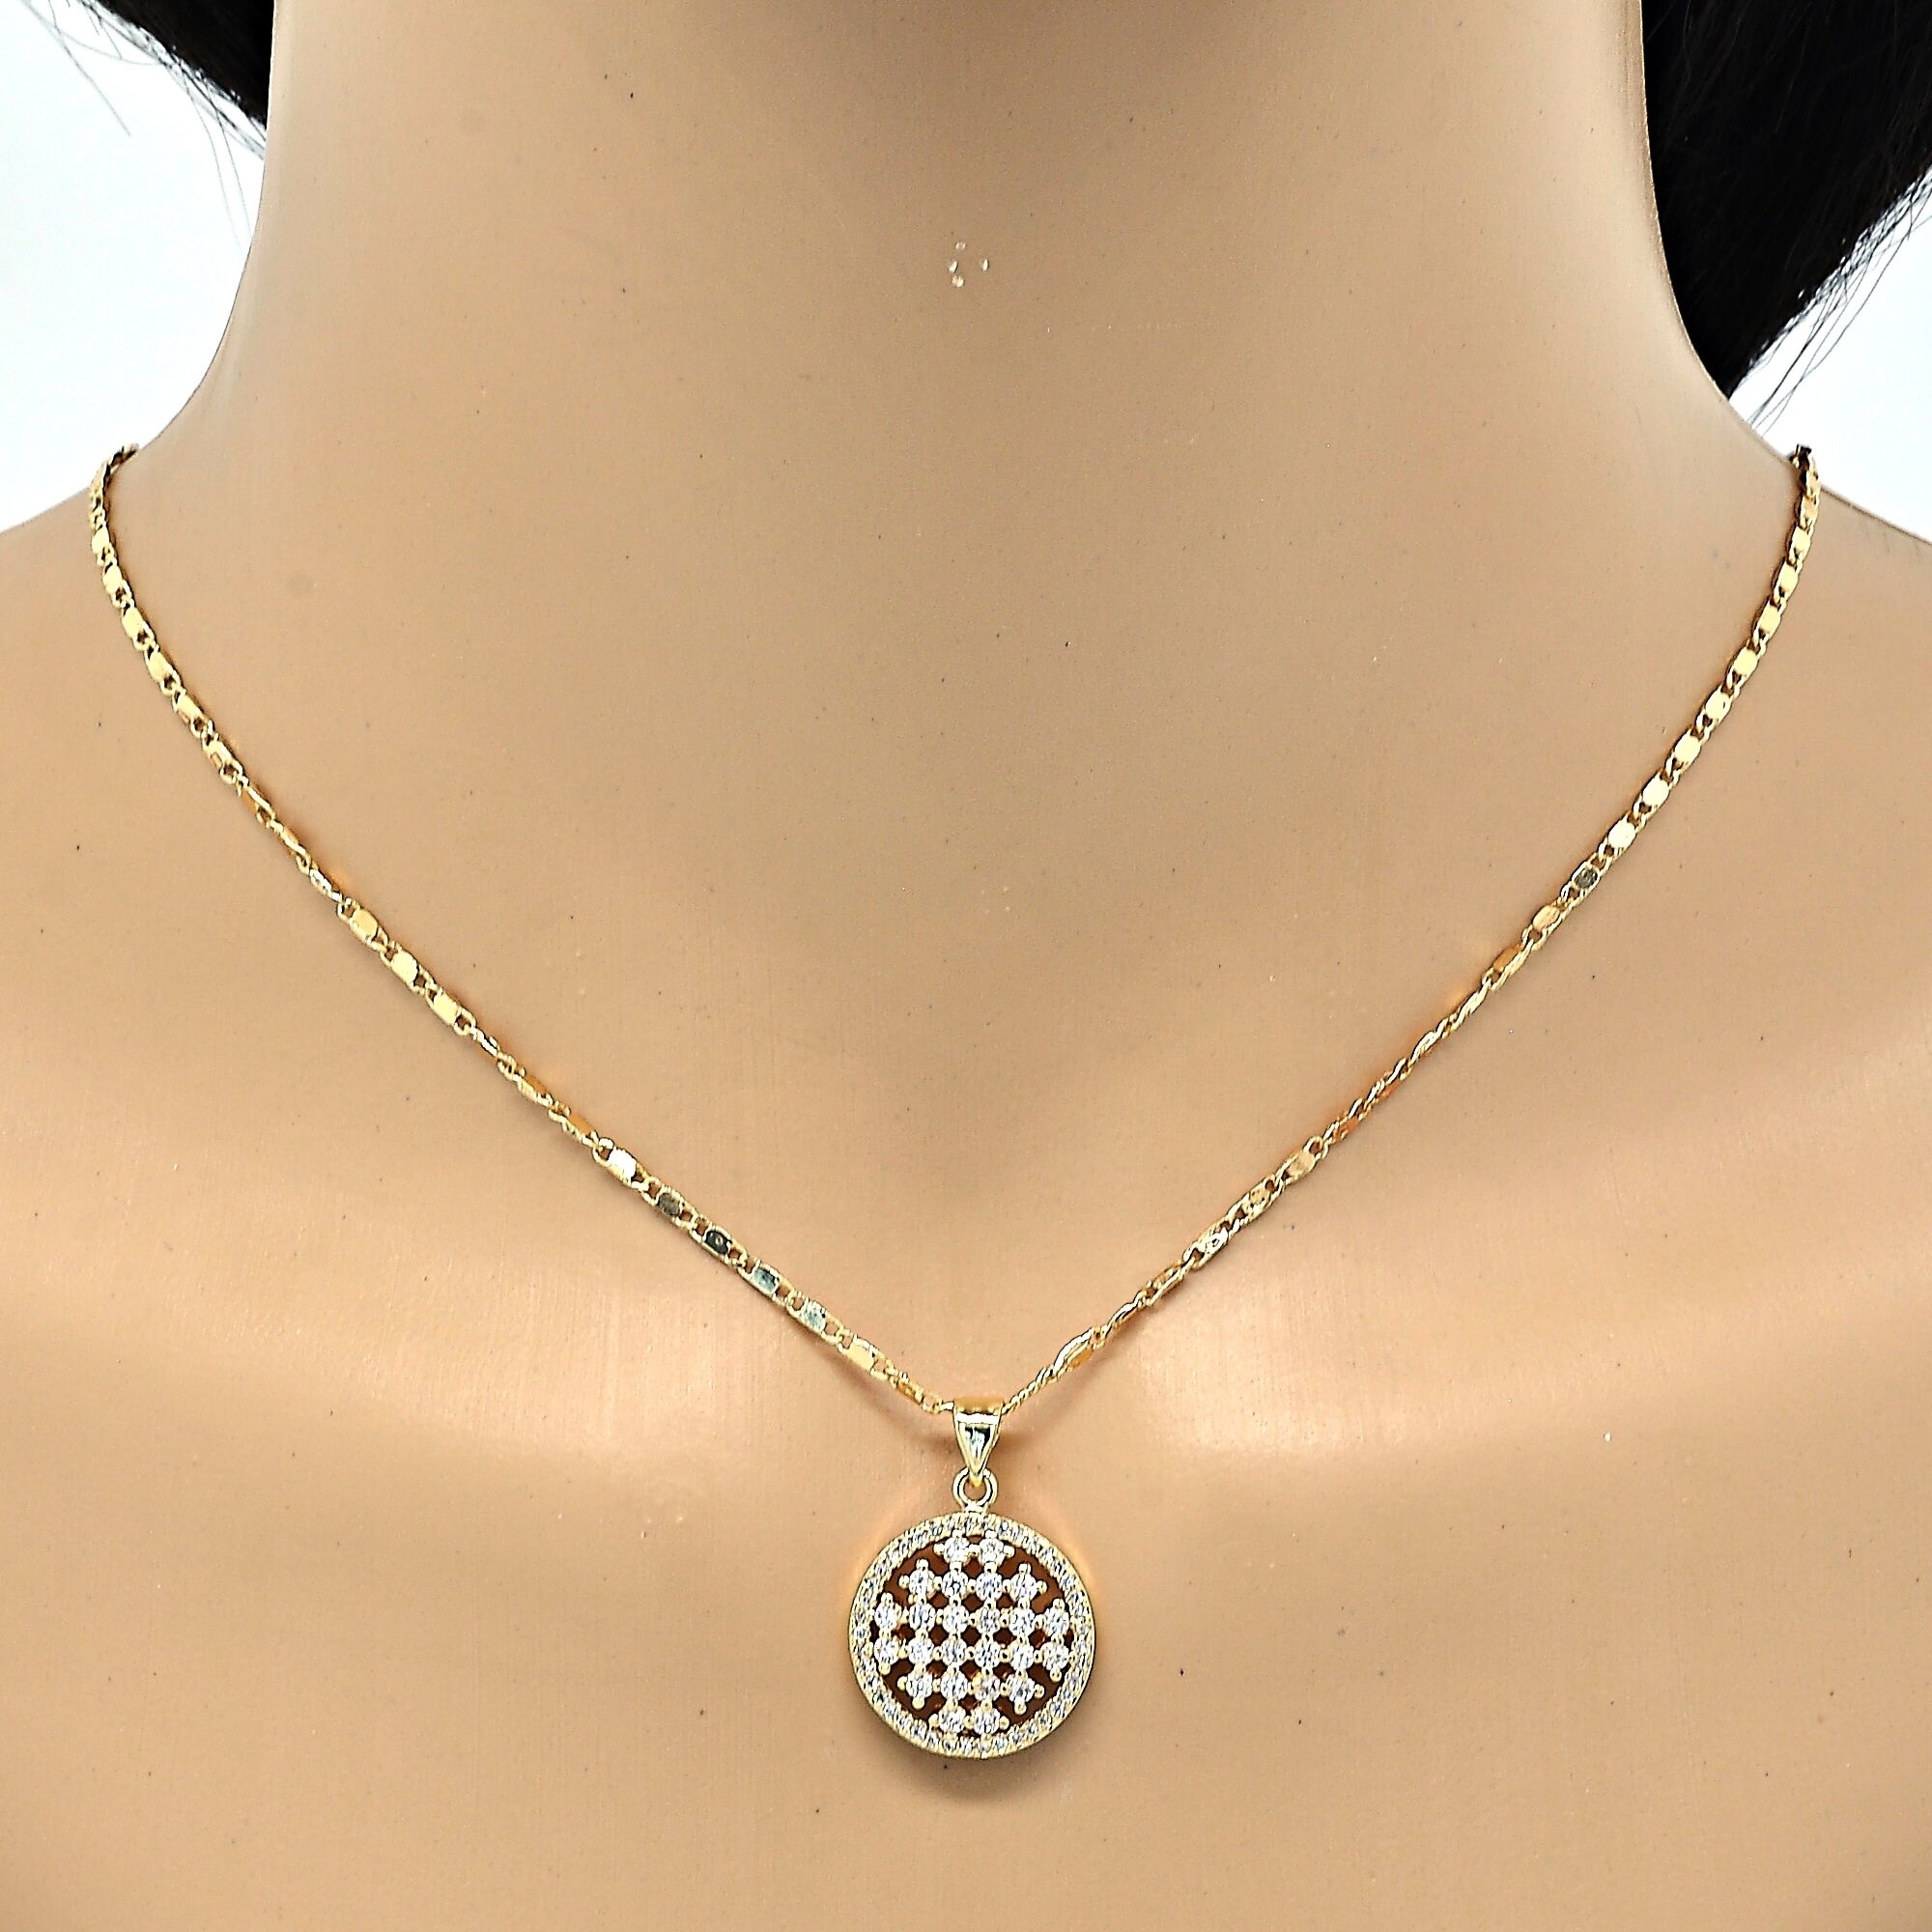 GOLD Filled High Polish Finsh PENDANT NECKLACE WITH DIAMOND ACCENT